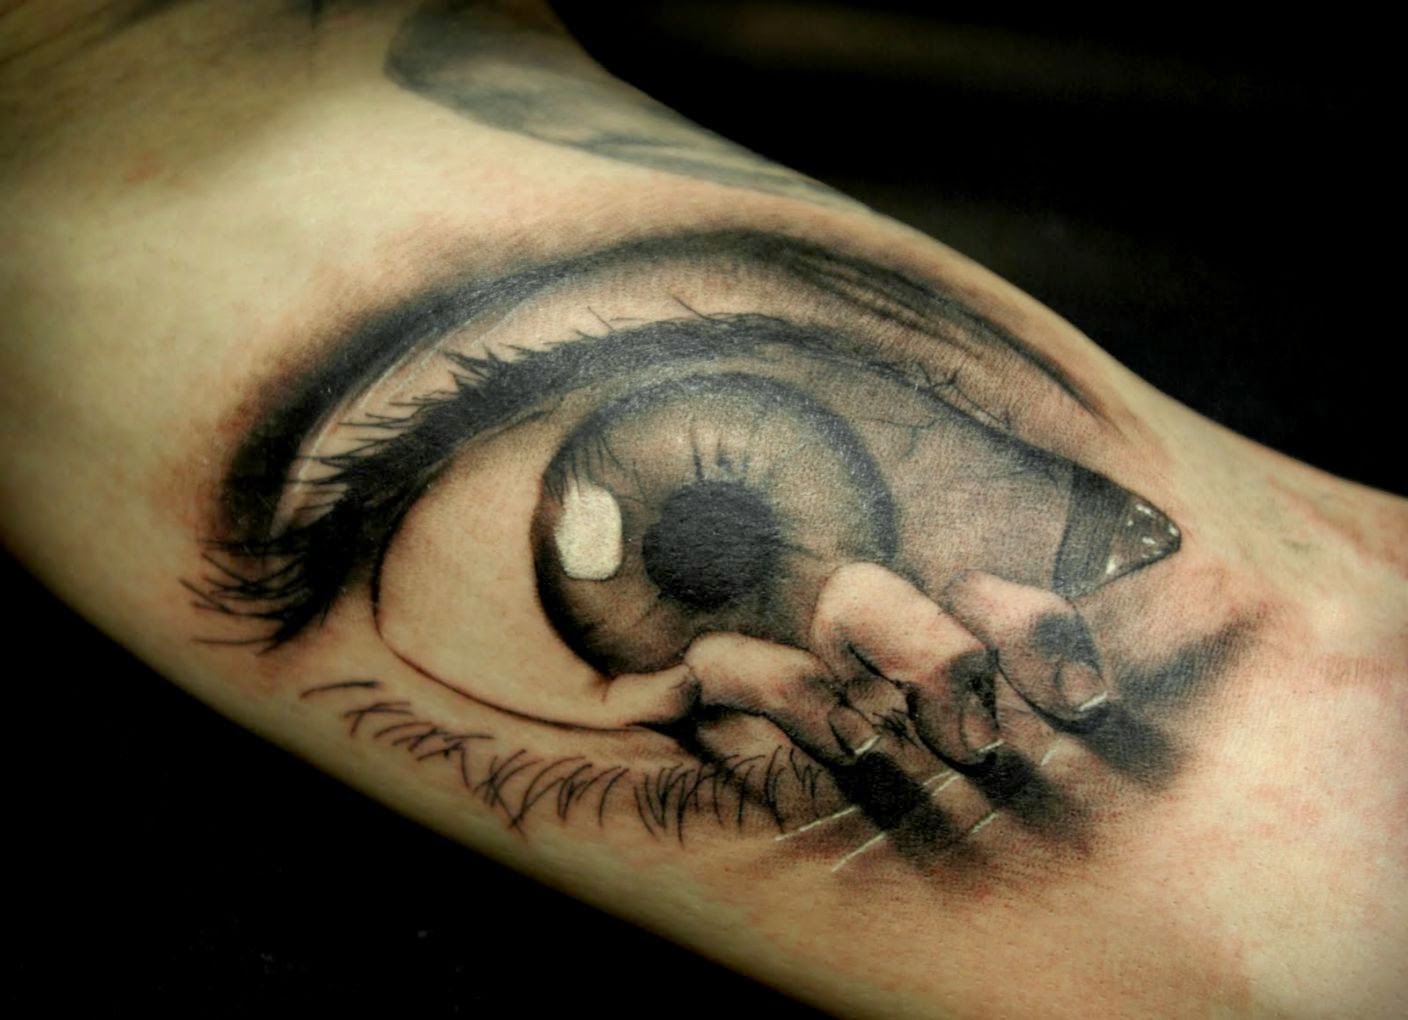 Third Eye Tattoo Designs and Meanings - wide 9